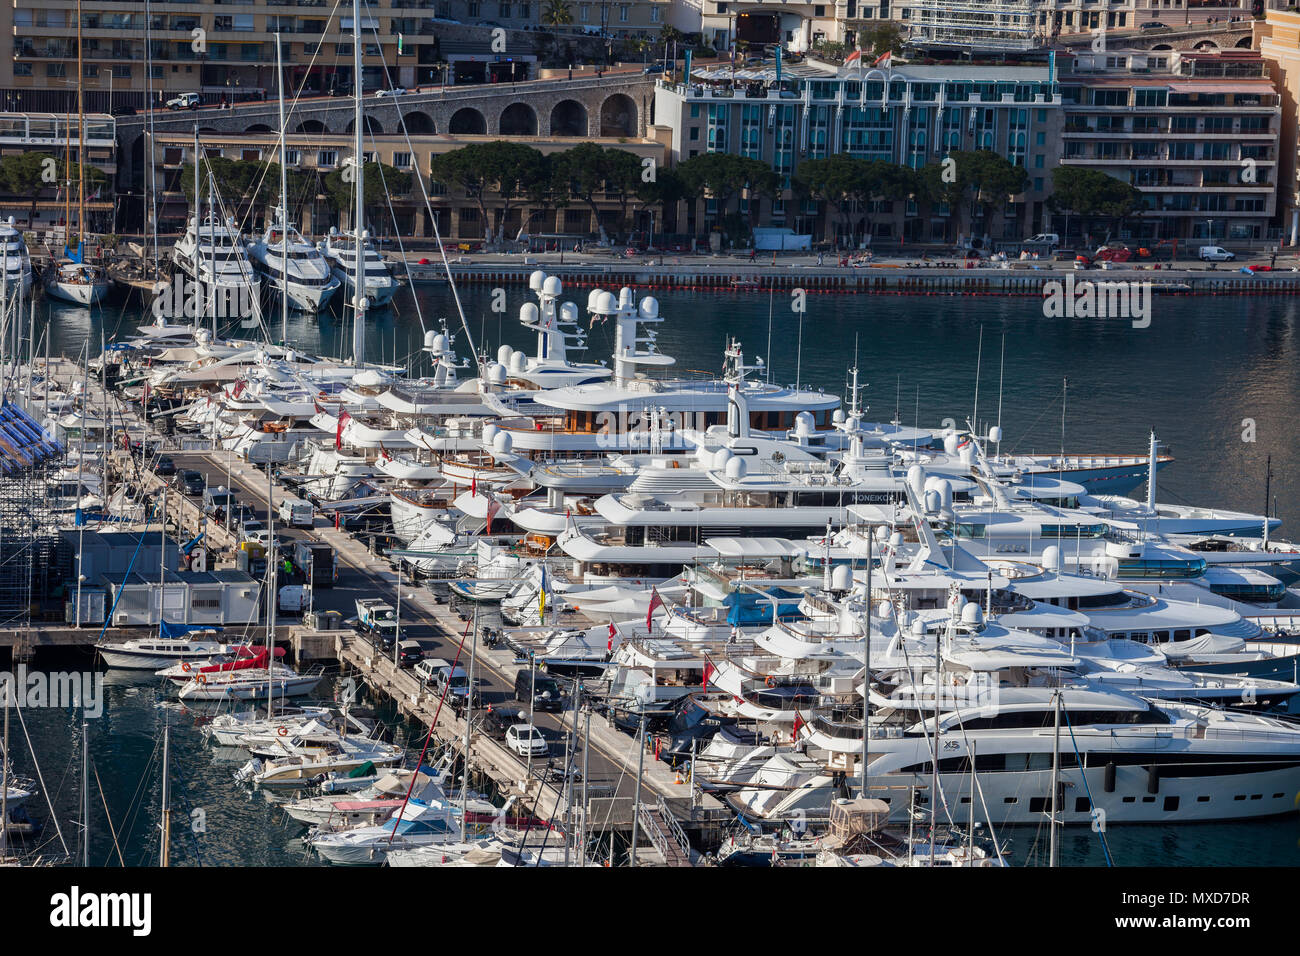 Monaco principality, luxury yachts and boats in Port Hercule on Mediterranean Sea, Monte Carlo in the background Stock Photo